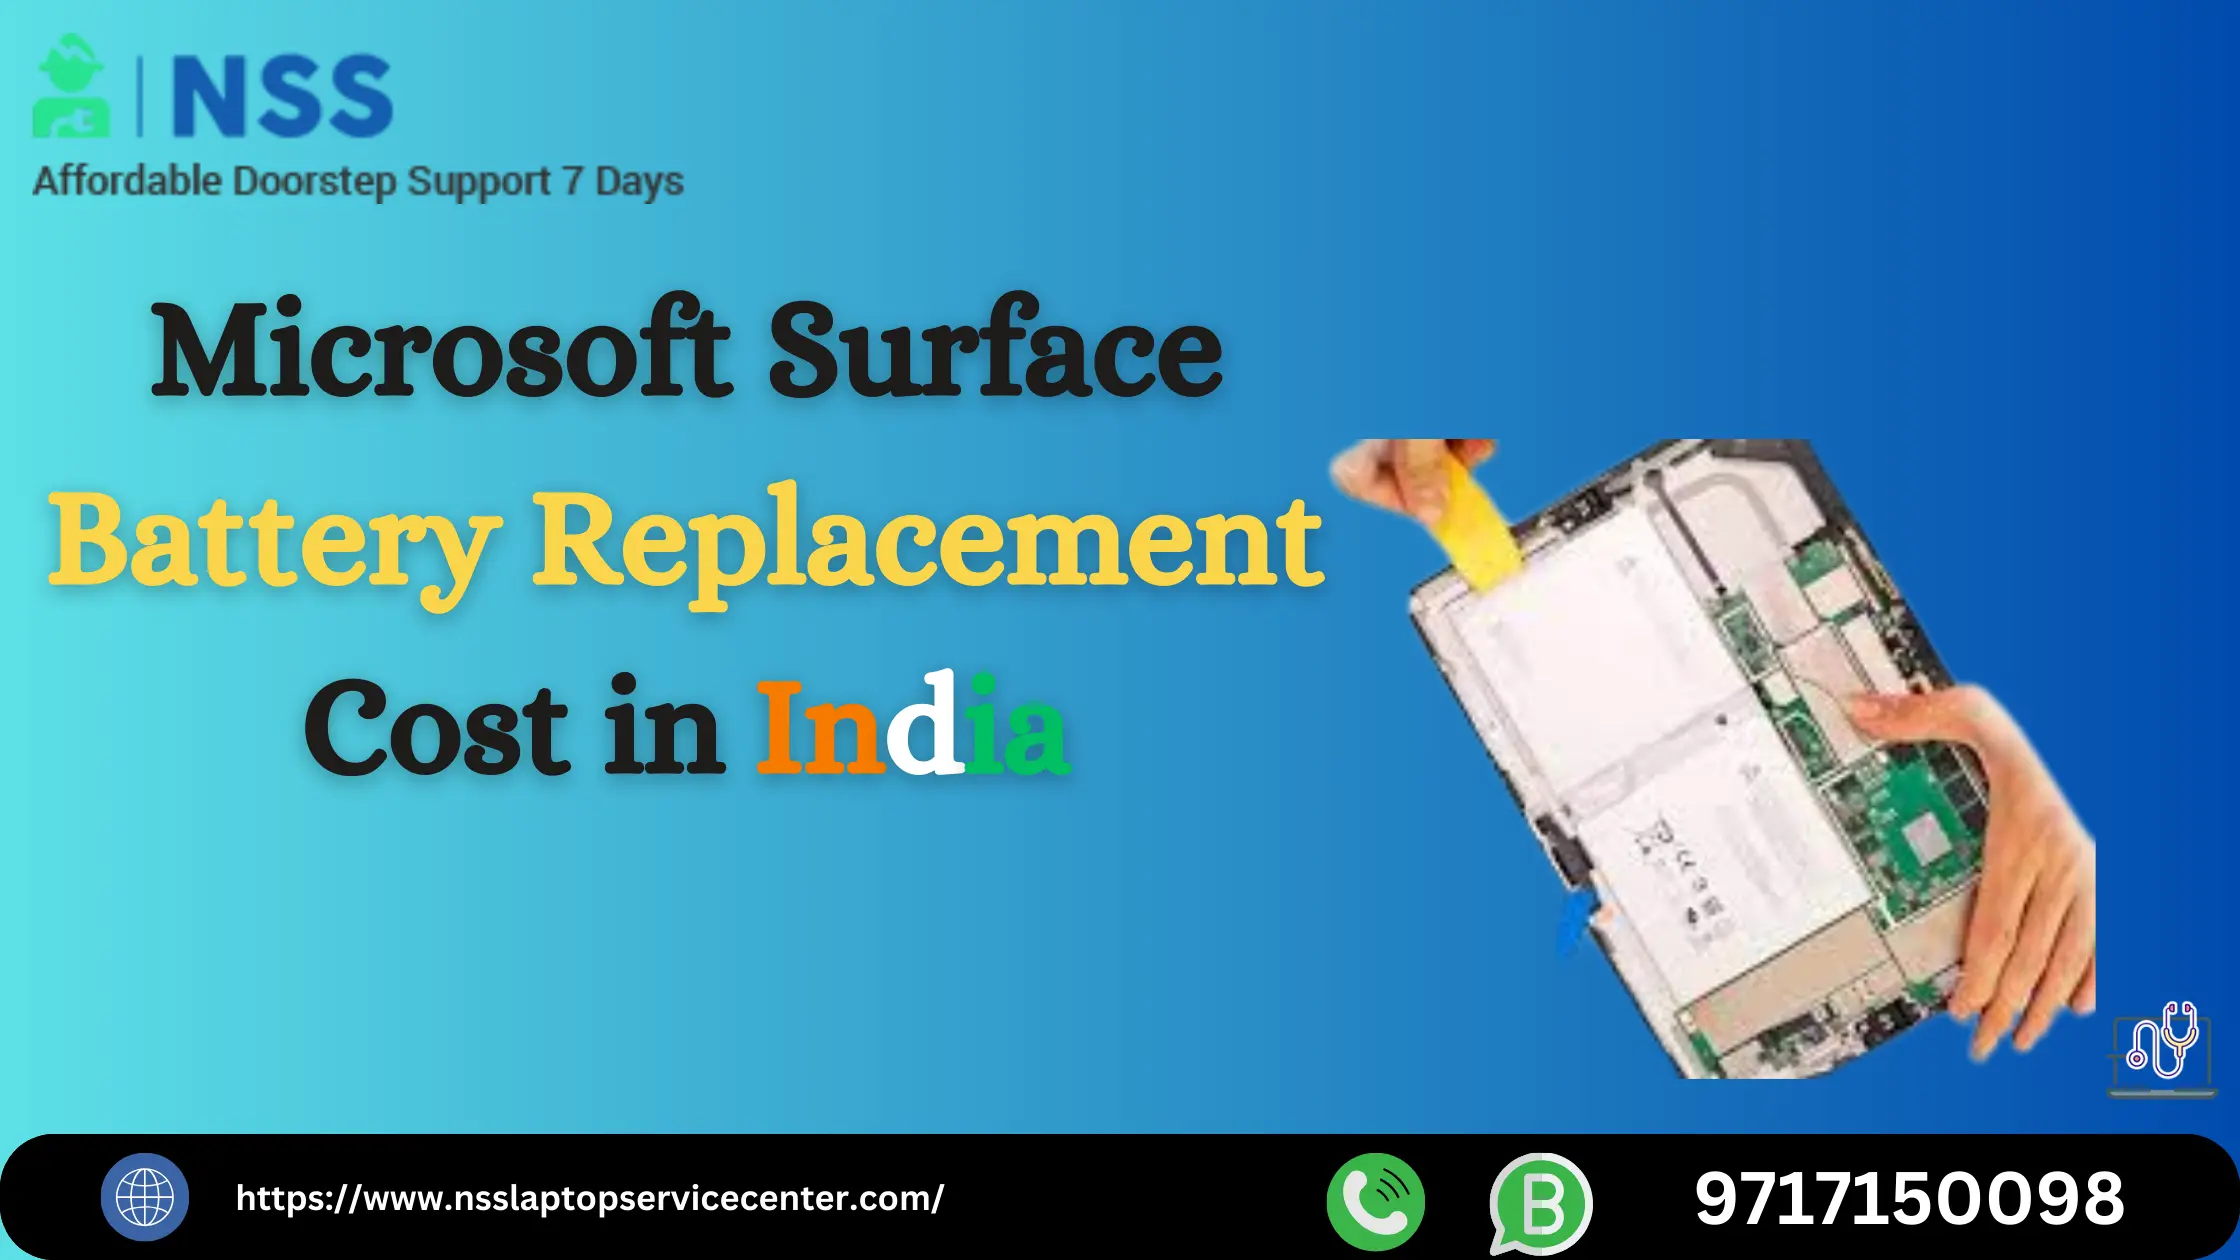 How Much Microsoft Surface Battery Replacement Cost in India